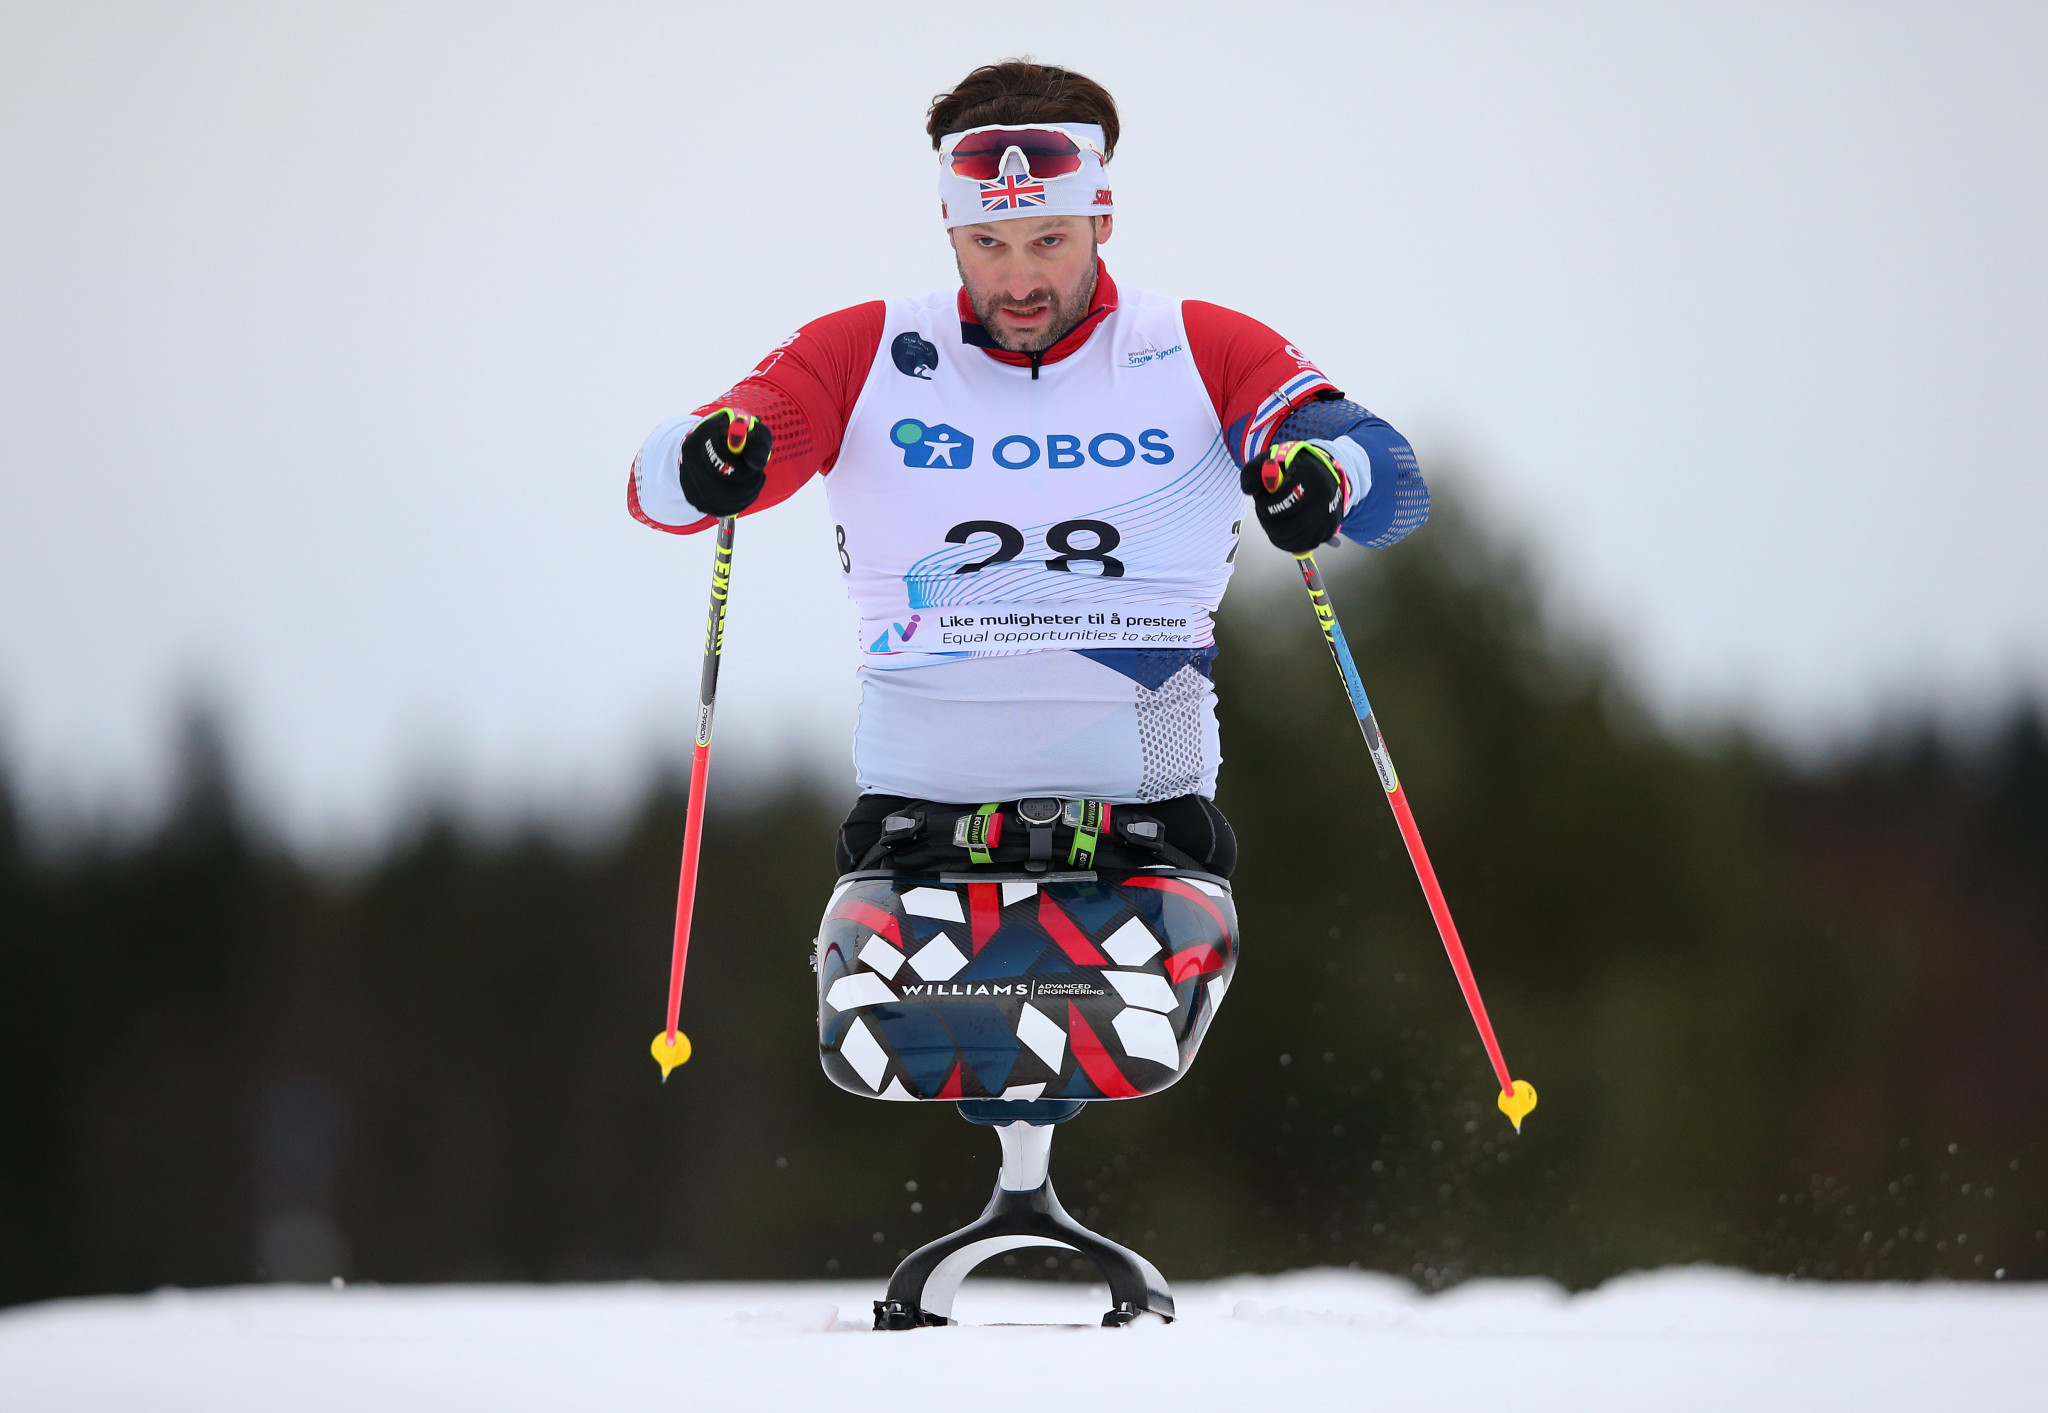 British Nordic skier able to race at Beijing 2022 despite COVID-19 jeopardy